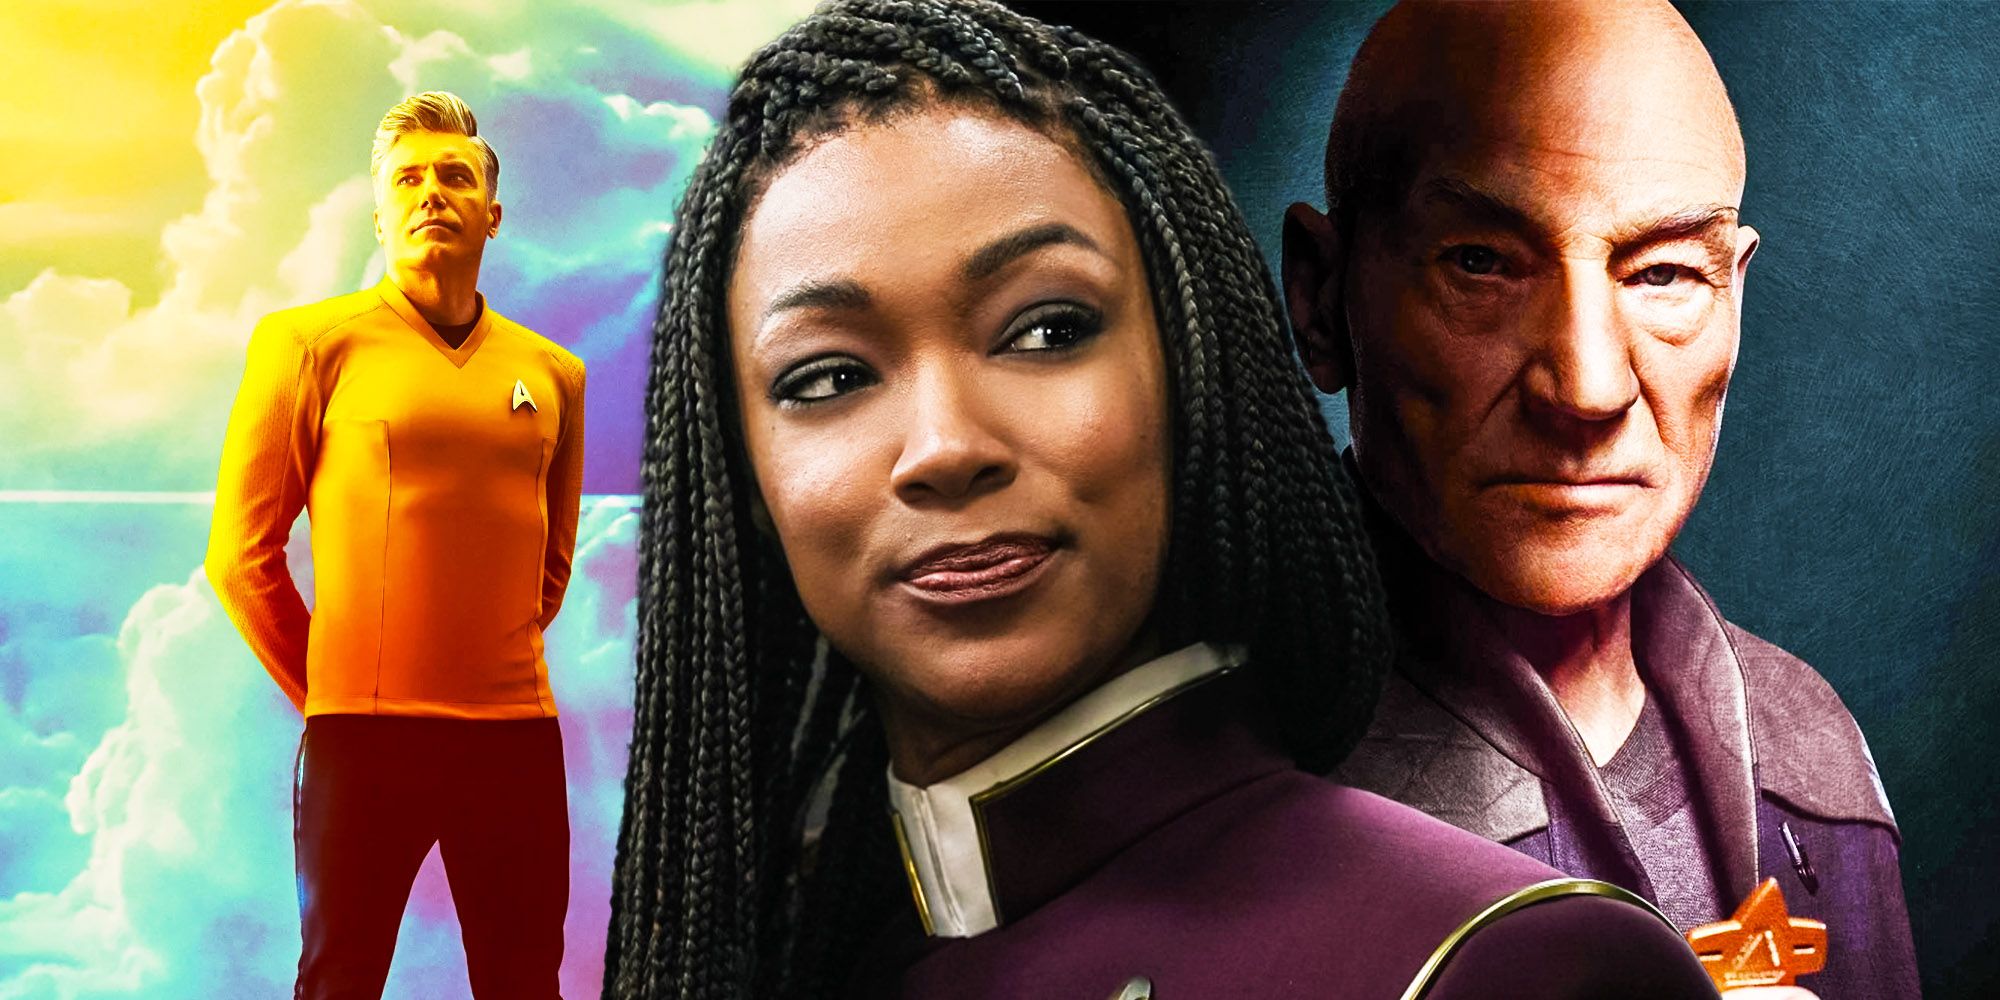 Sonequa Martin-Green as Captain Burnham in front of Anson Mount as Captain Pike and Patrick Stewart as Admiral Picard in Star Trek